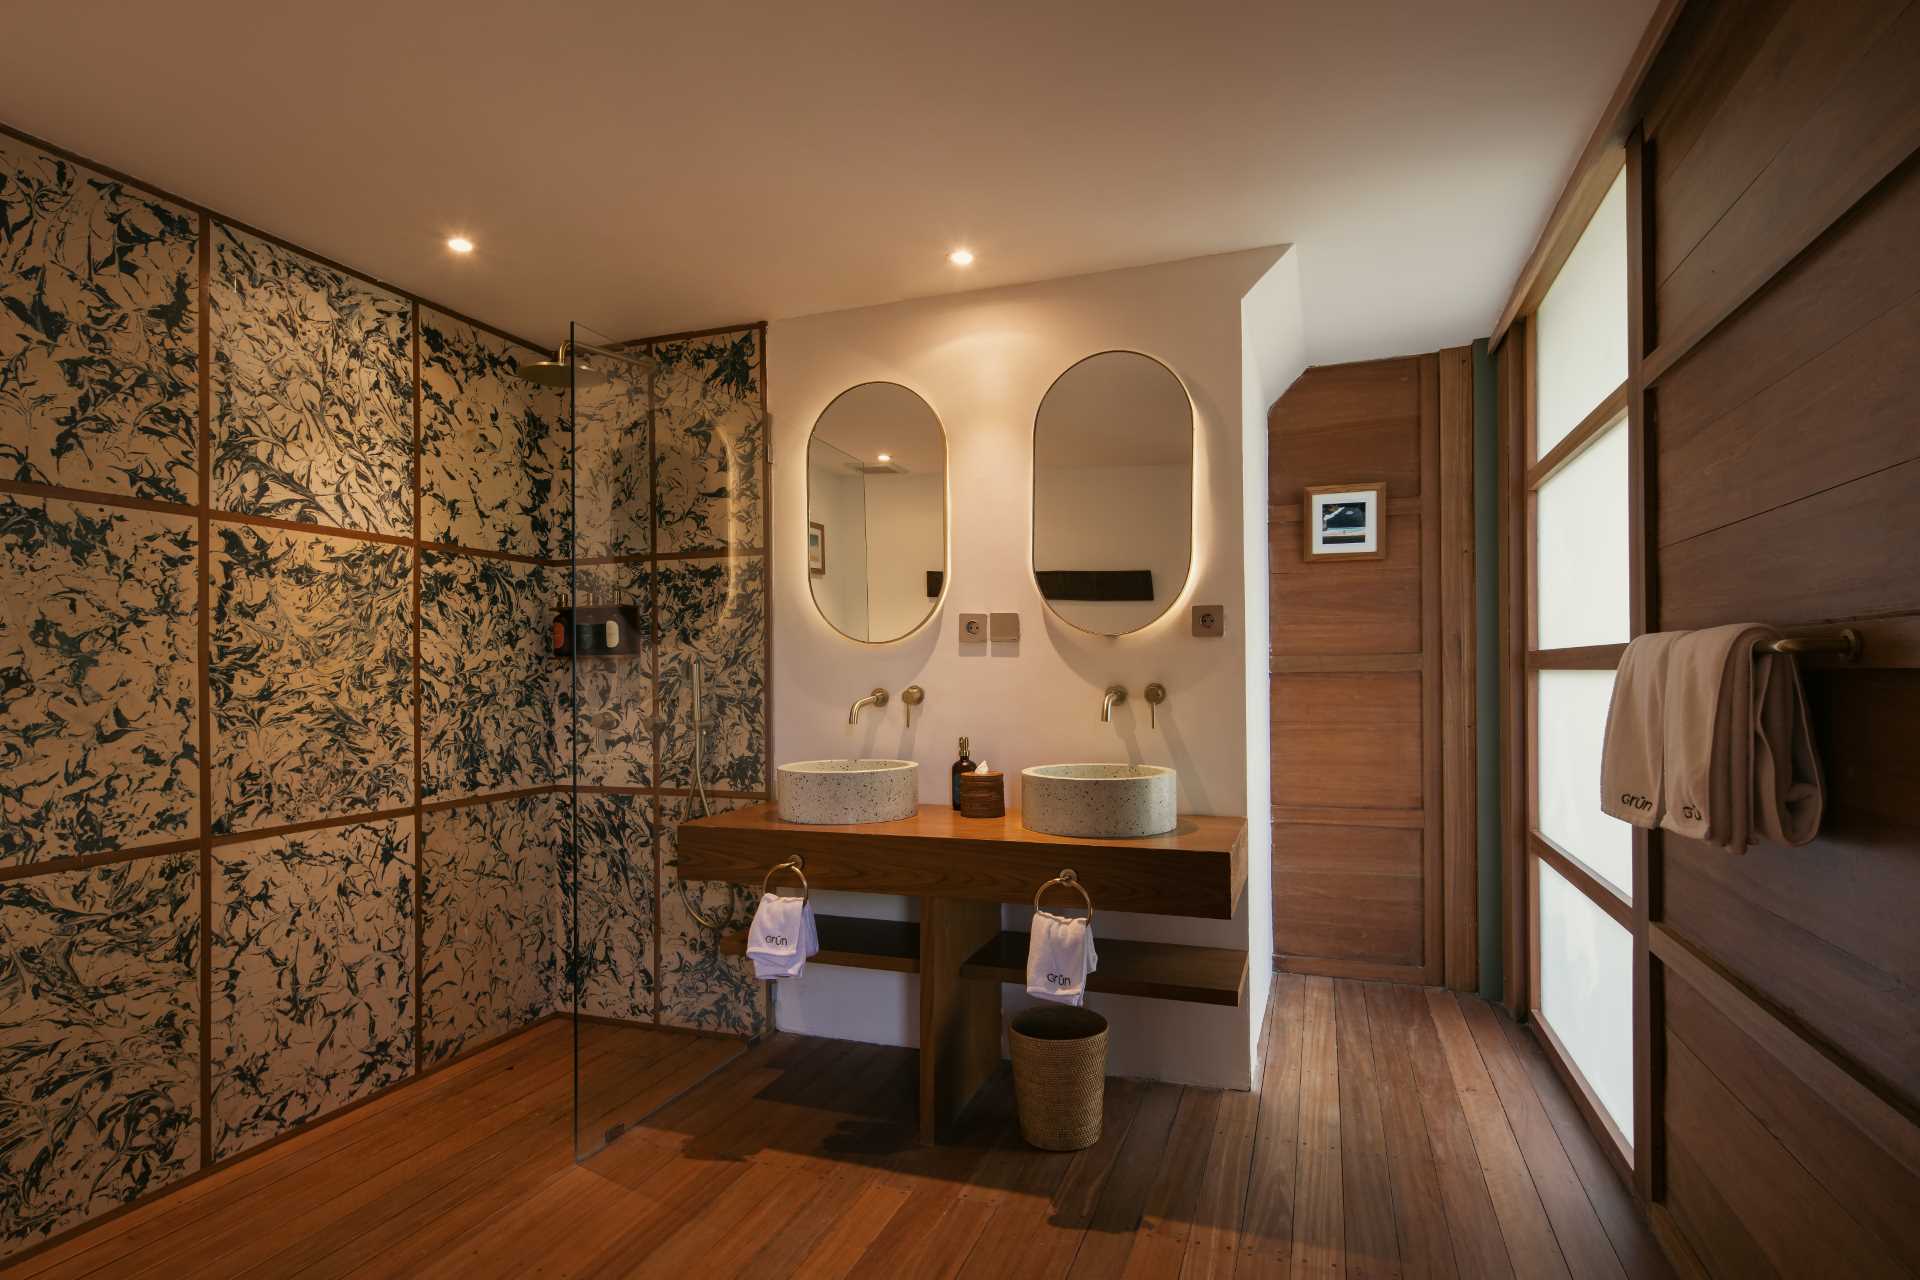 A modern bathroom with a double vanity and recycled plastic tiles that offer an artistic element.